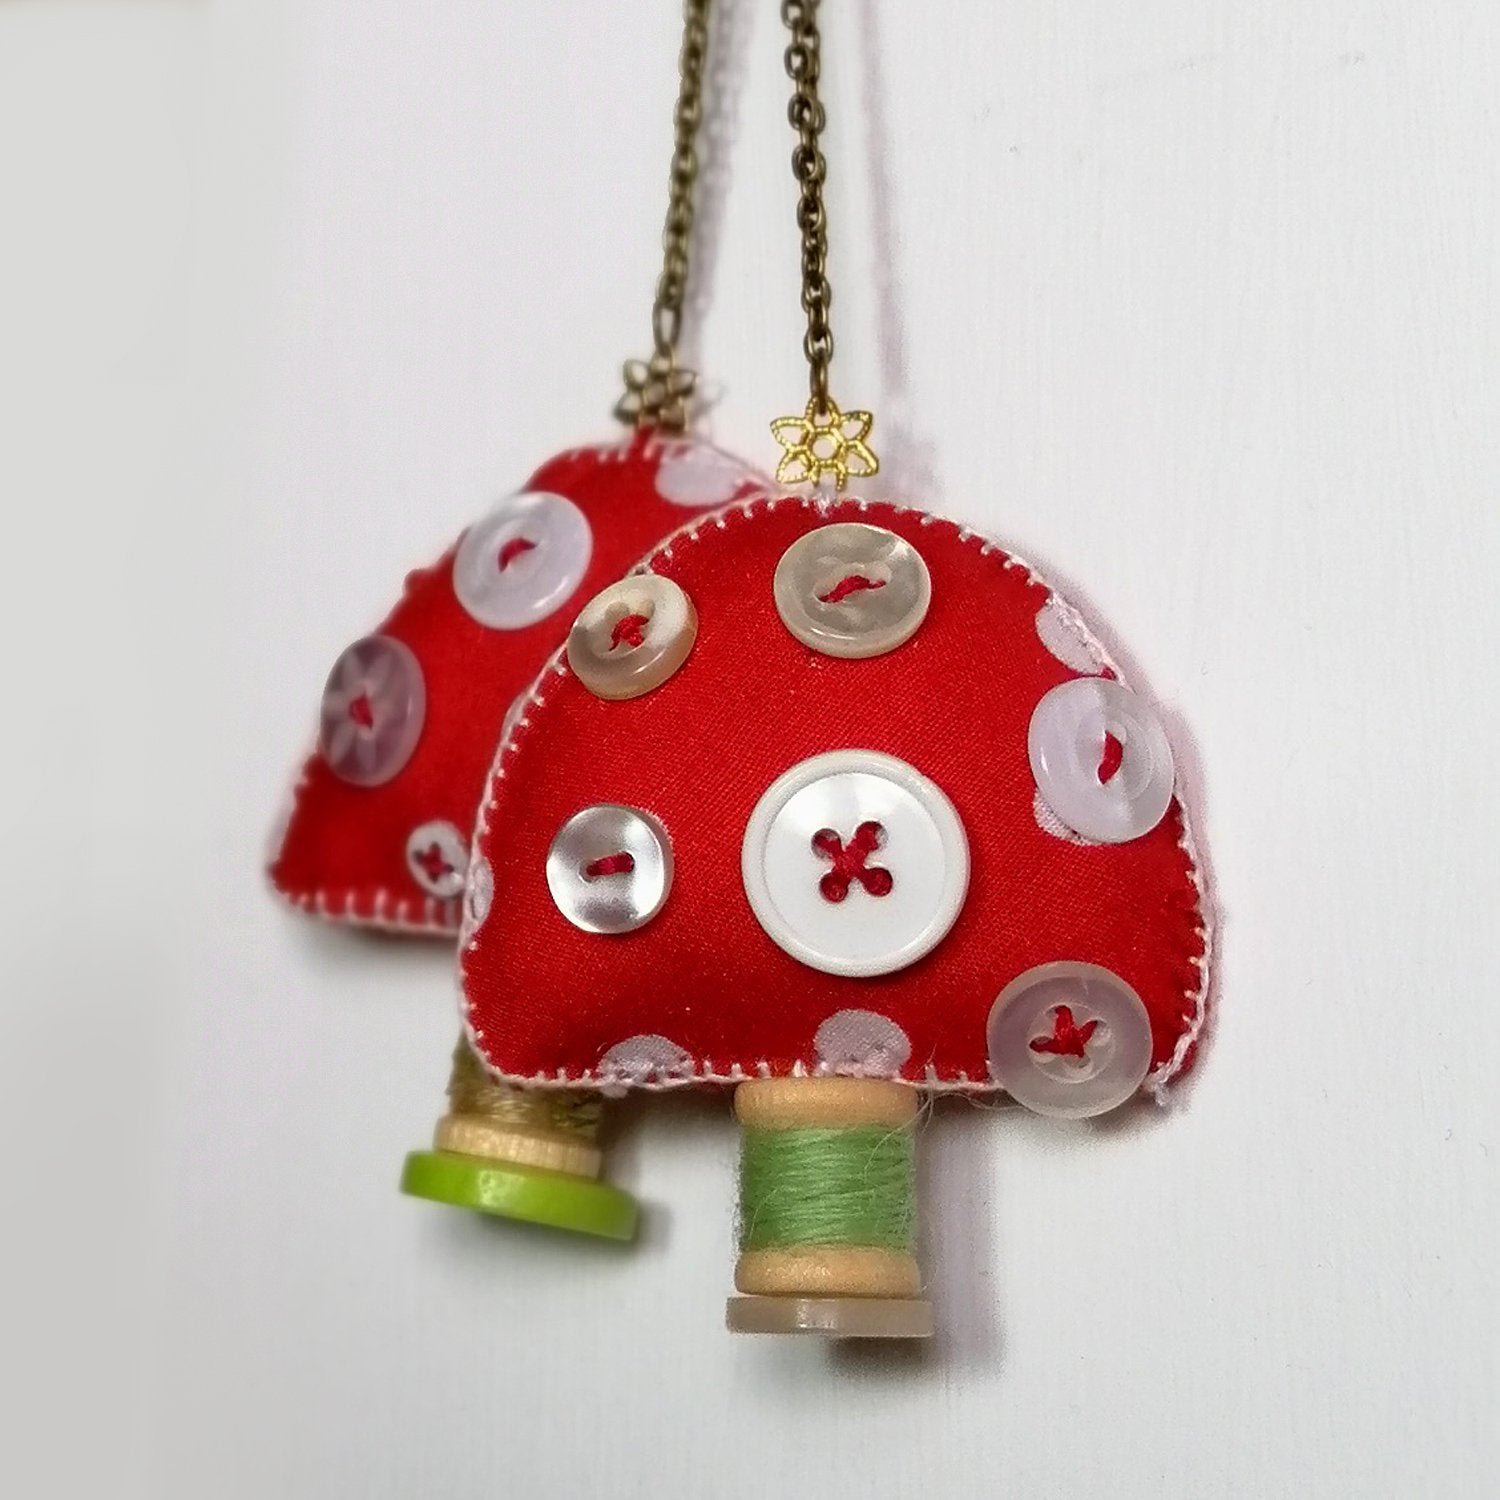 Red Fabric toadstool ornament with white spots, buttons and wooden spool.